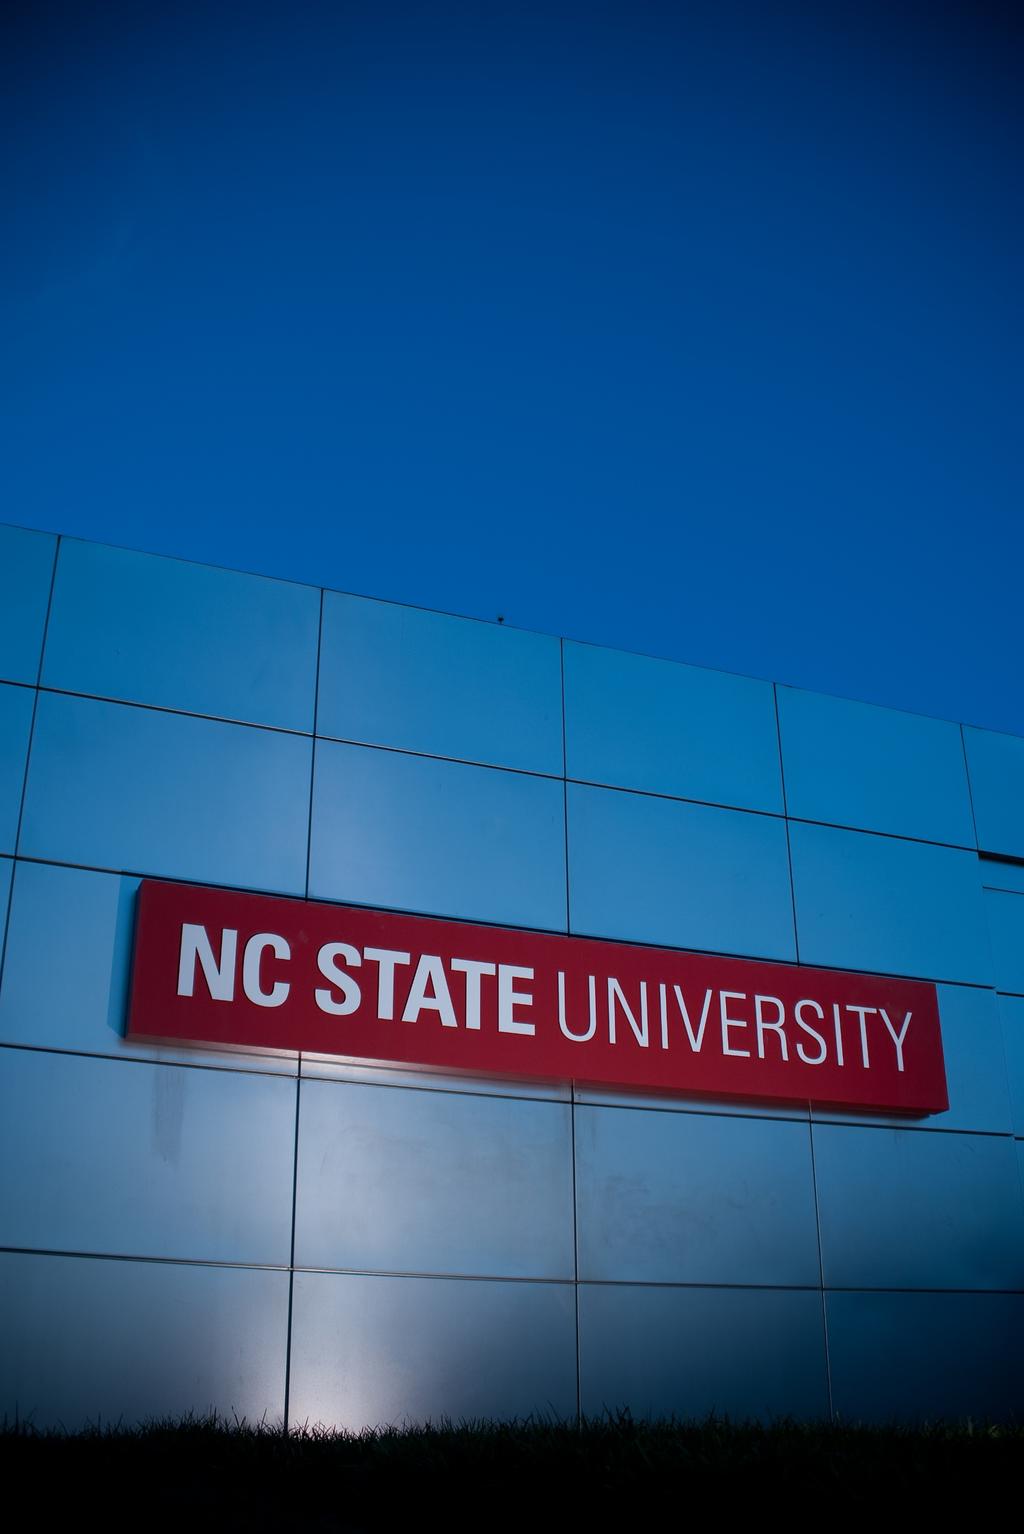 a NC State University is an equal opportunity and affirmative action employer.